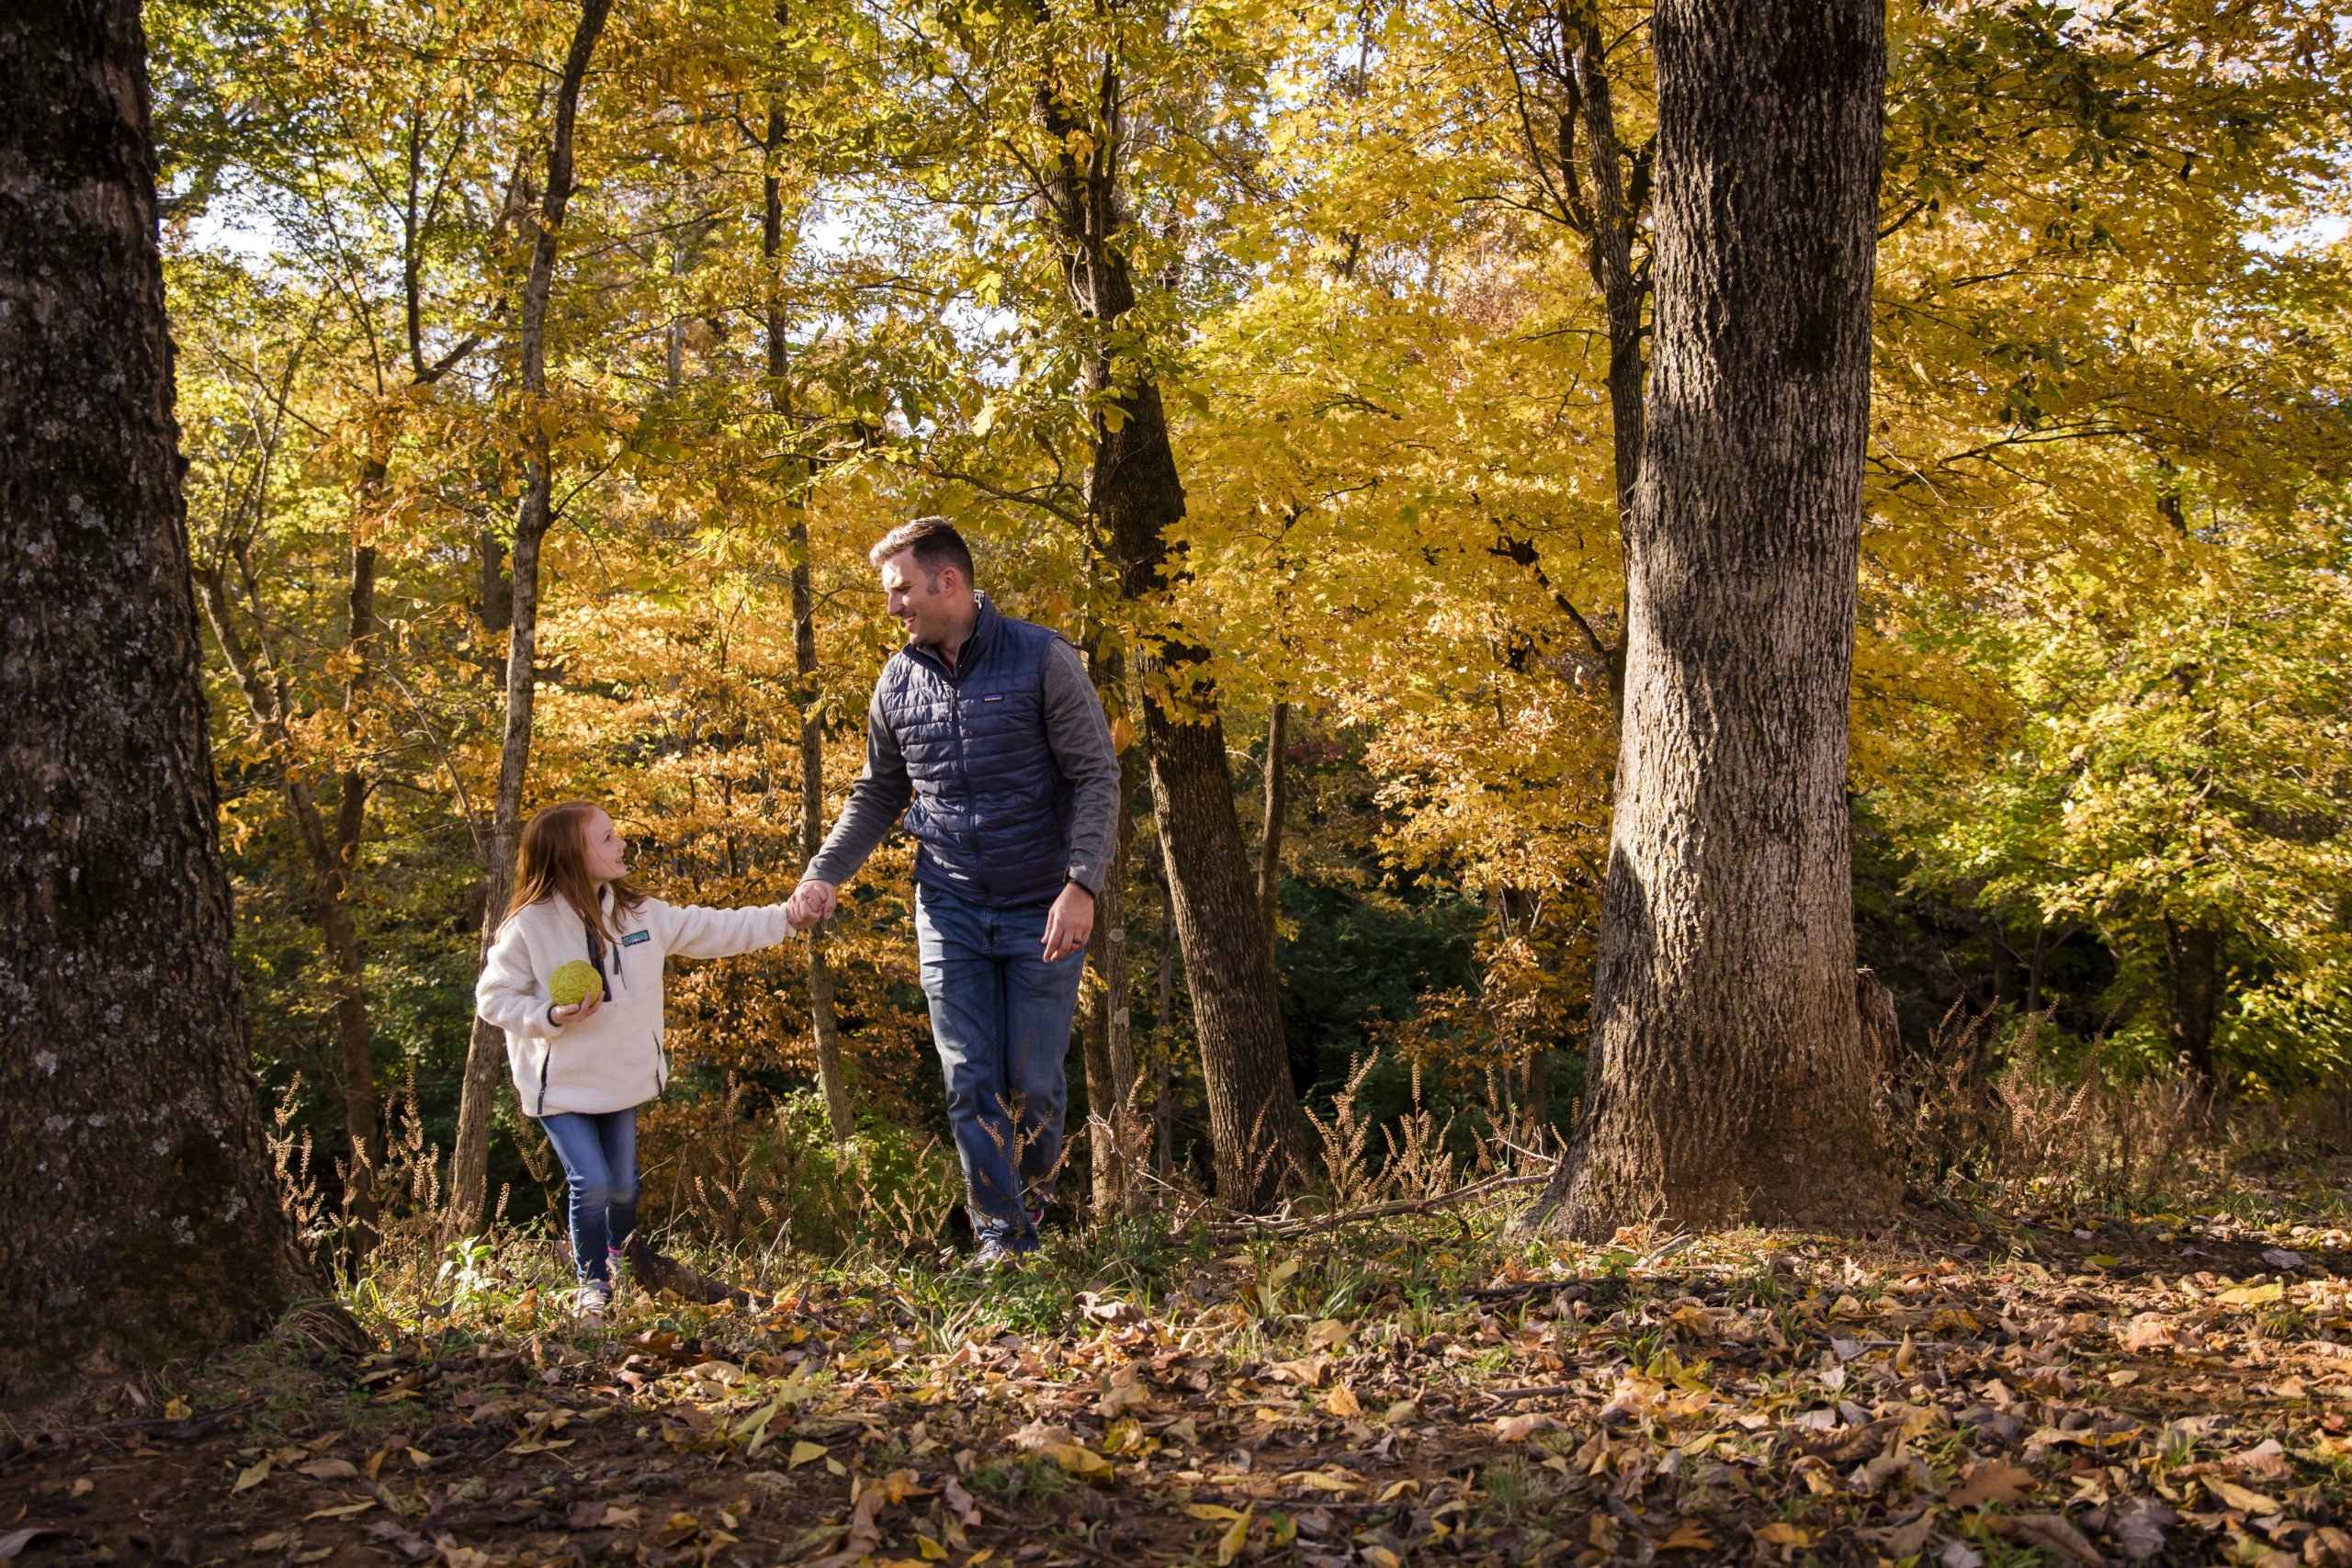 A man and his daughter walk in a forest with yellow fall leaves